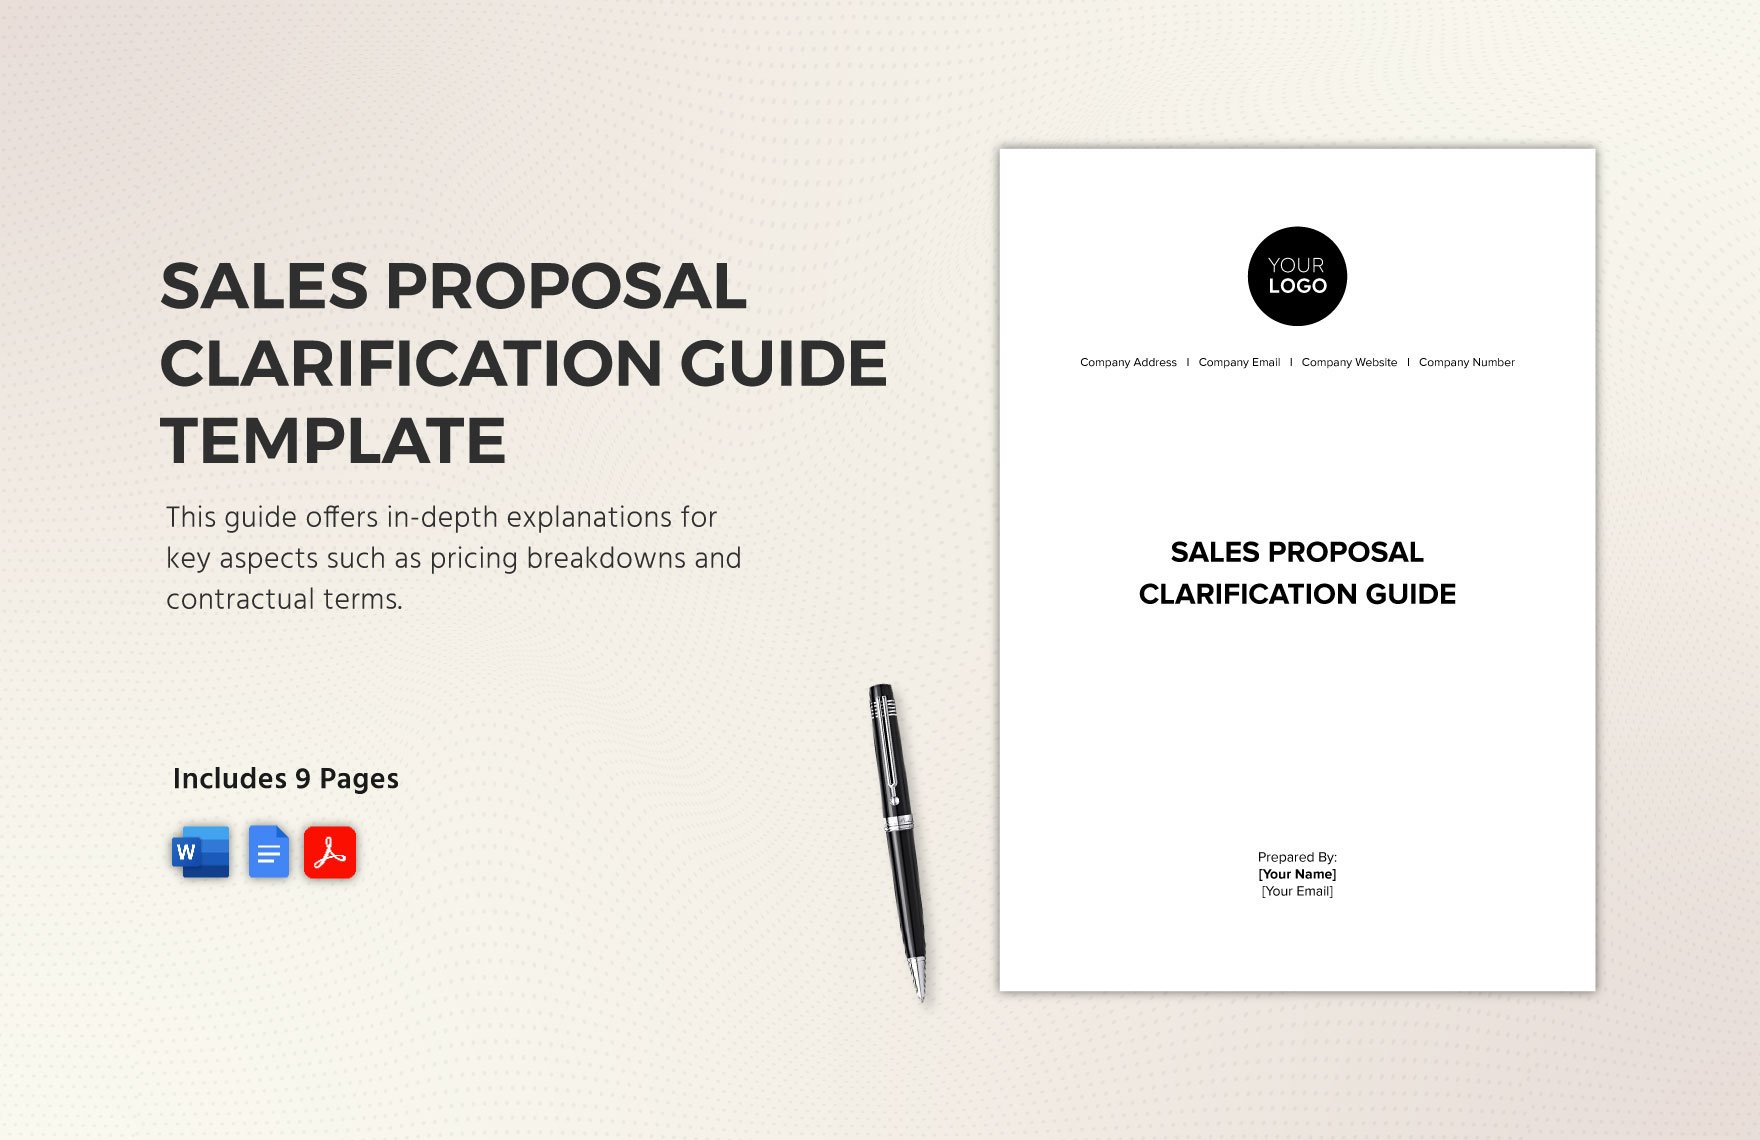 Sales Proposal Clarification Guide Template